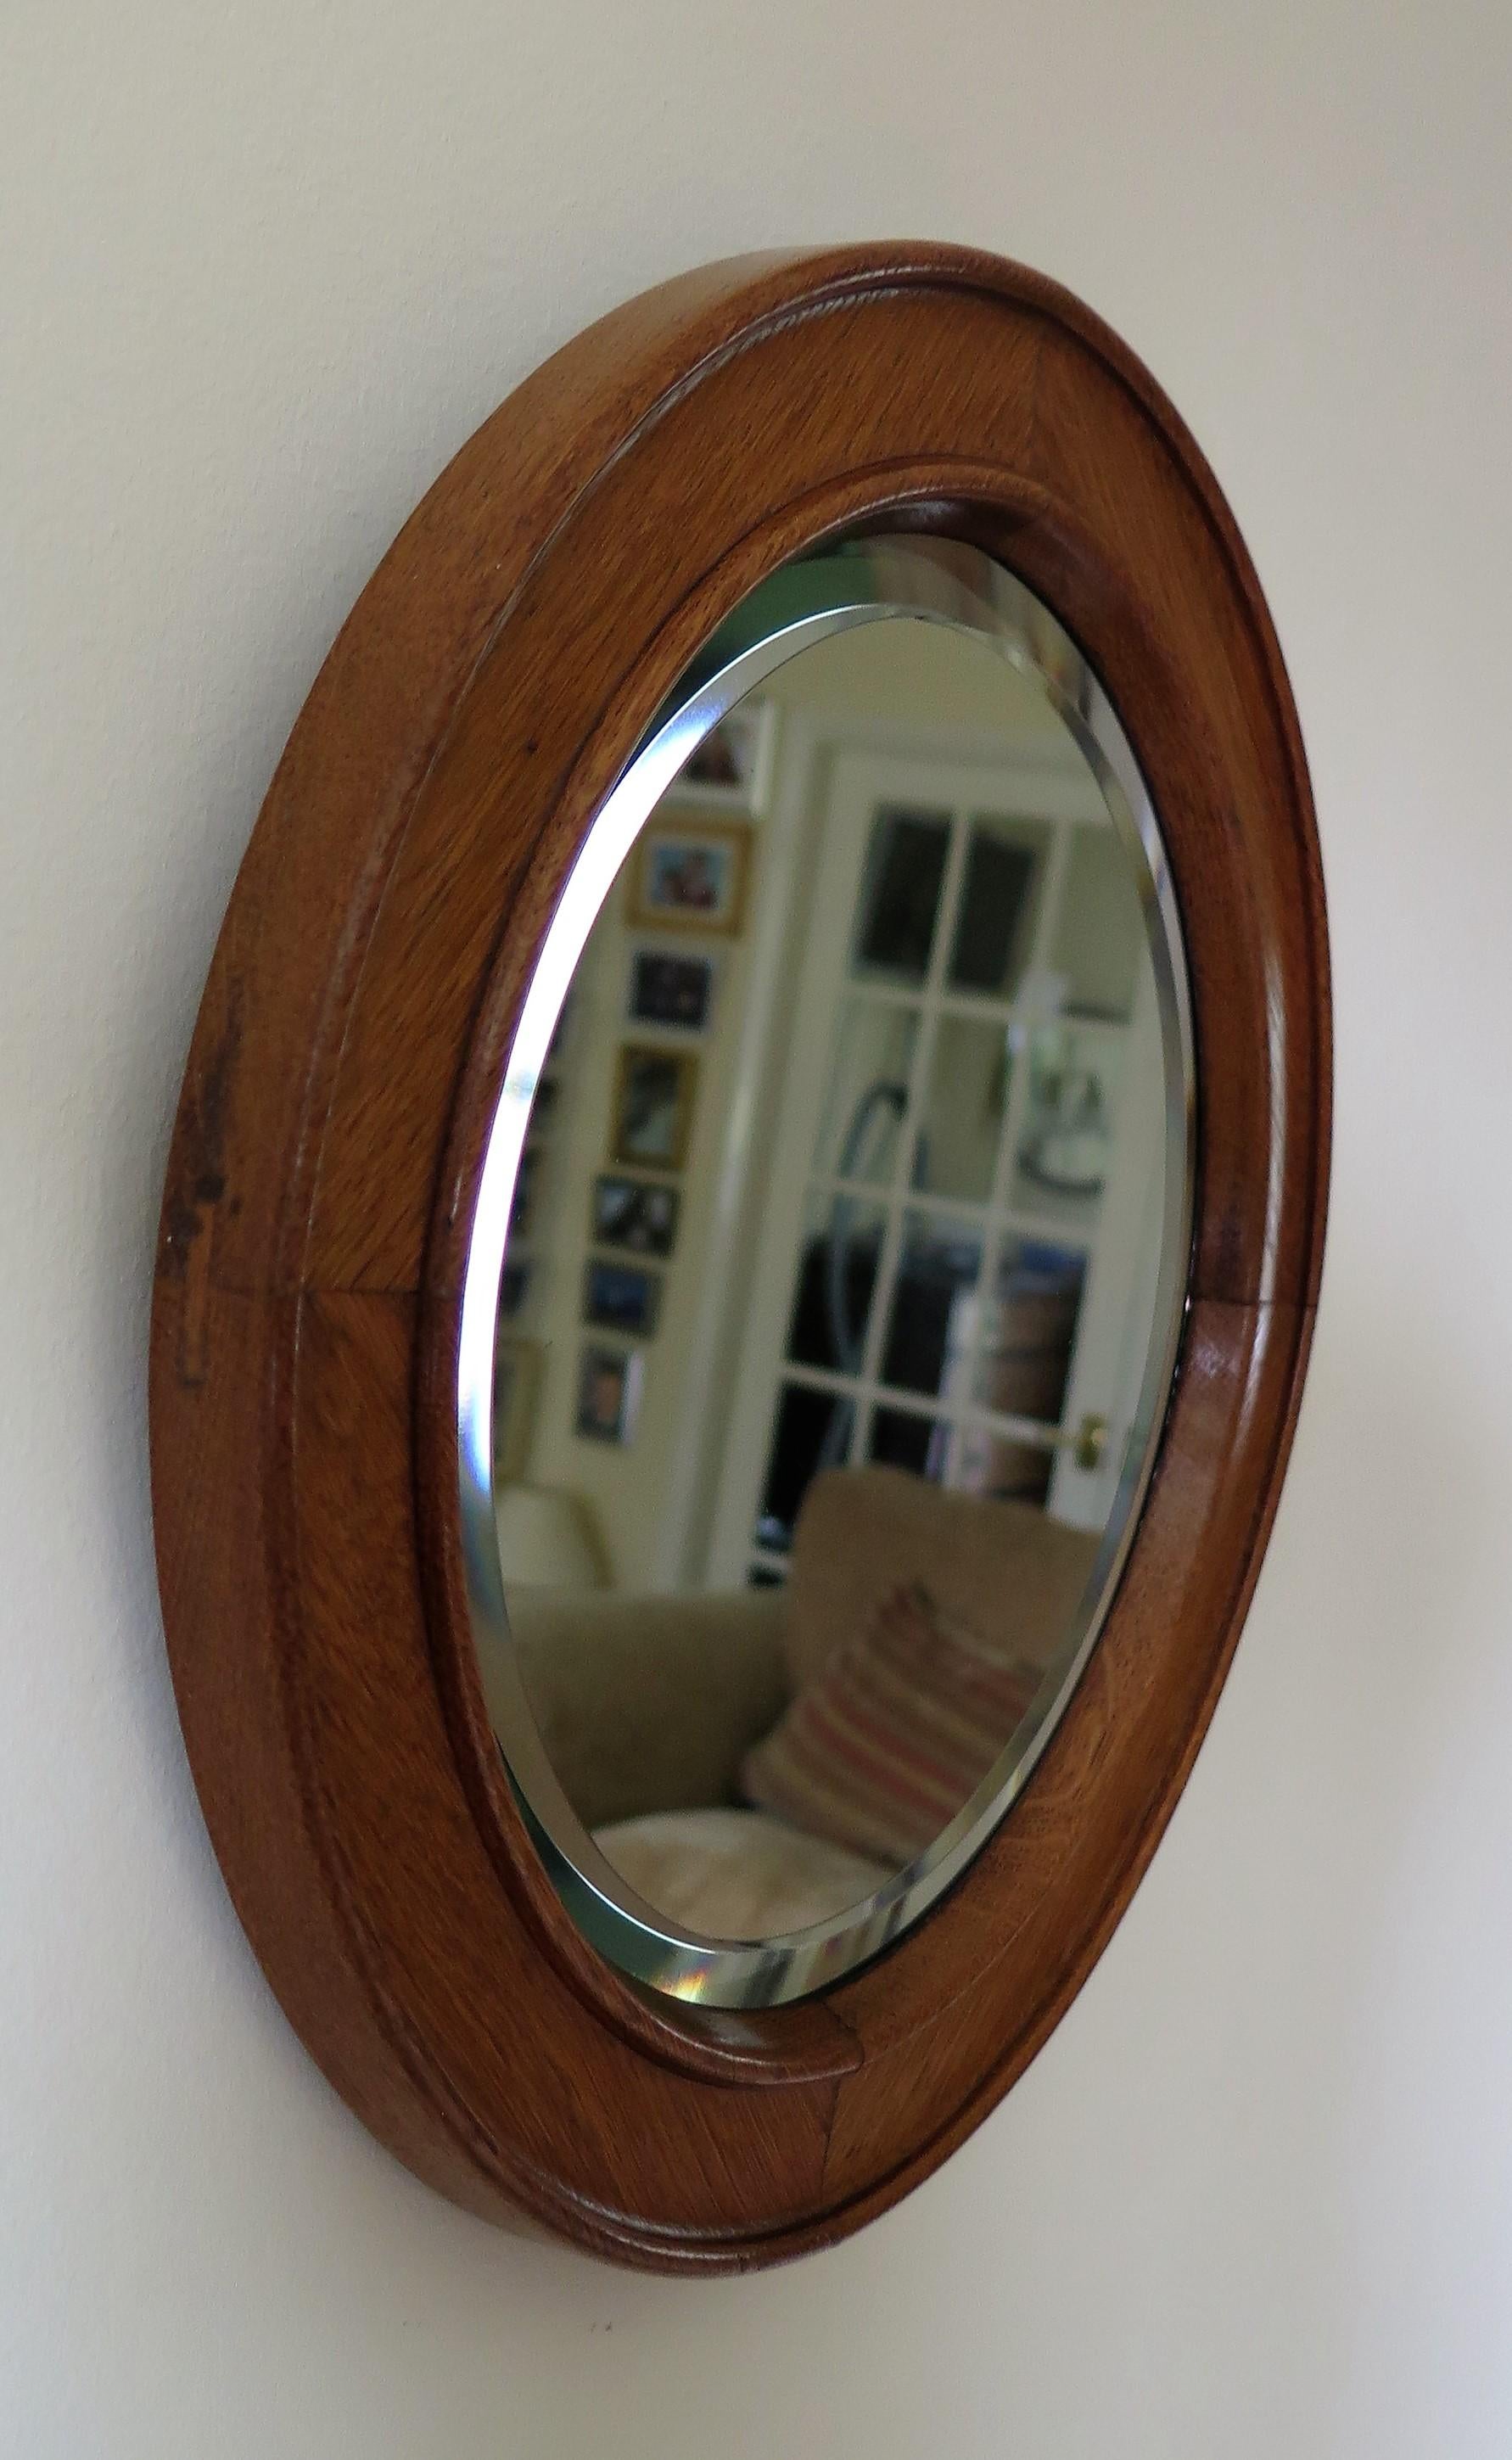 19th Century 19th C. Arts & Crafts Circular Wall Mirror Golden Oak Jointed Frame Bevel Glass